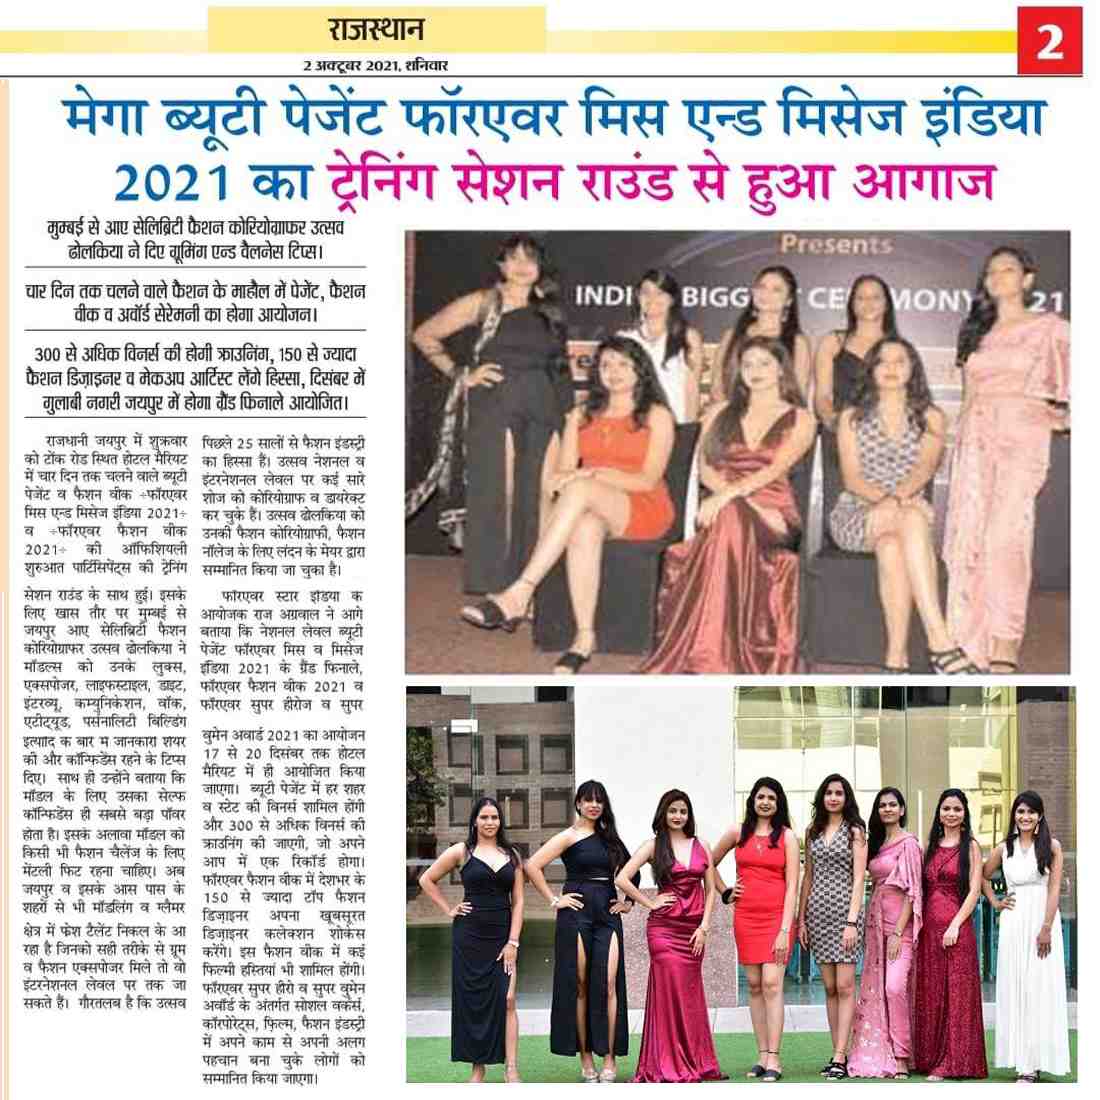 Mega Beauty Pageant Forever Miss India and Mrs India 2021 begins with a Round of Training Session